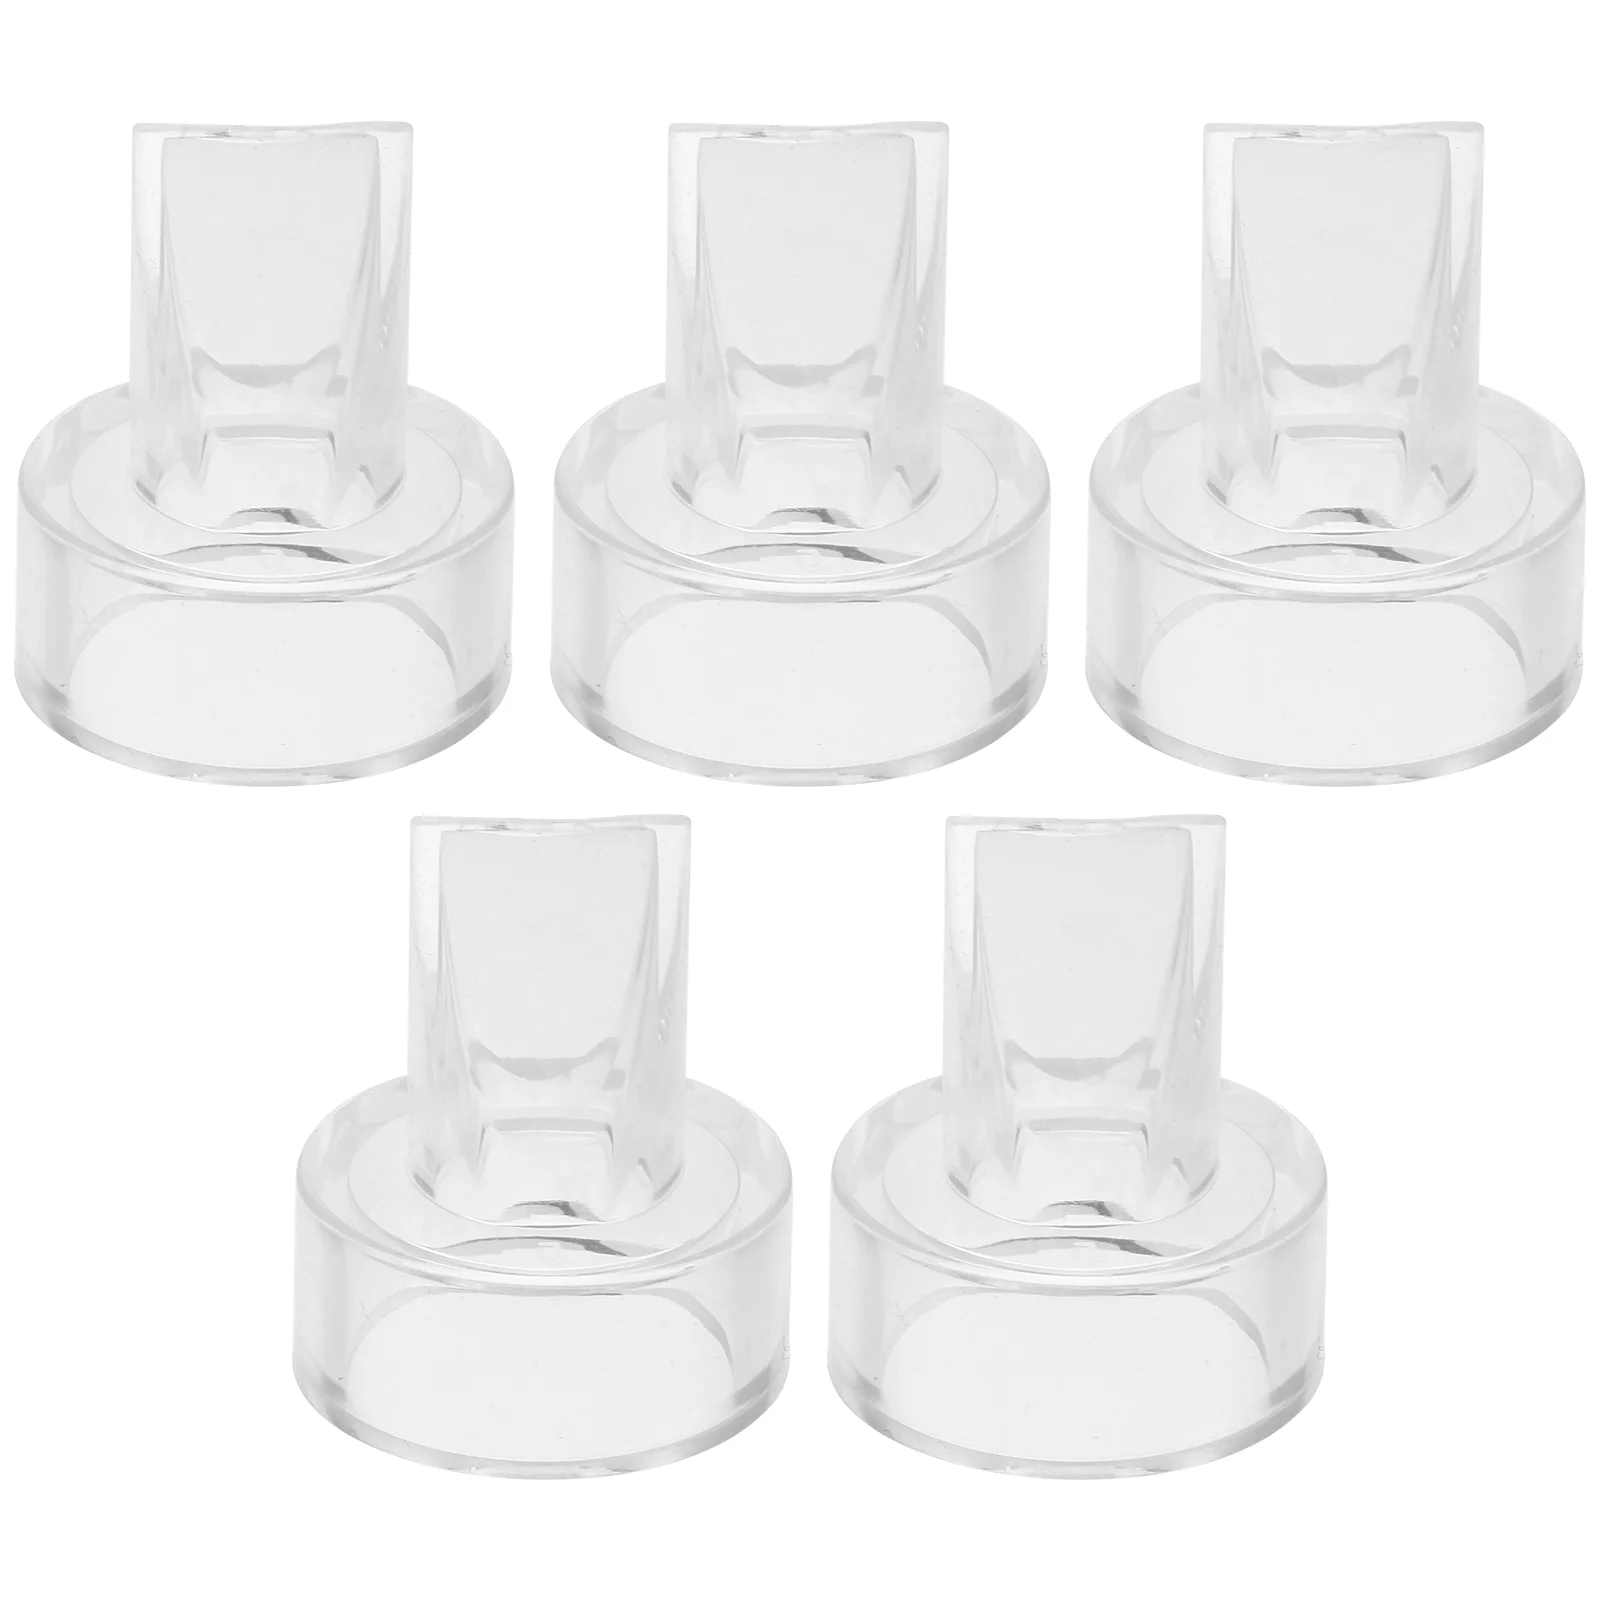 

5 Pcs Valve Spare Breast Milk Extractor Silicone Diaphragm for Suction Cups Tire Manual Parts Anti Backflow Valves